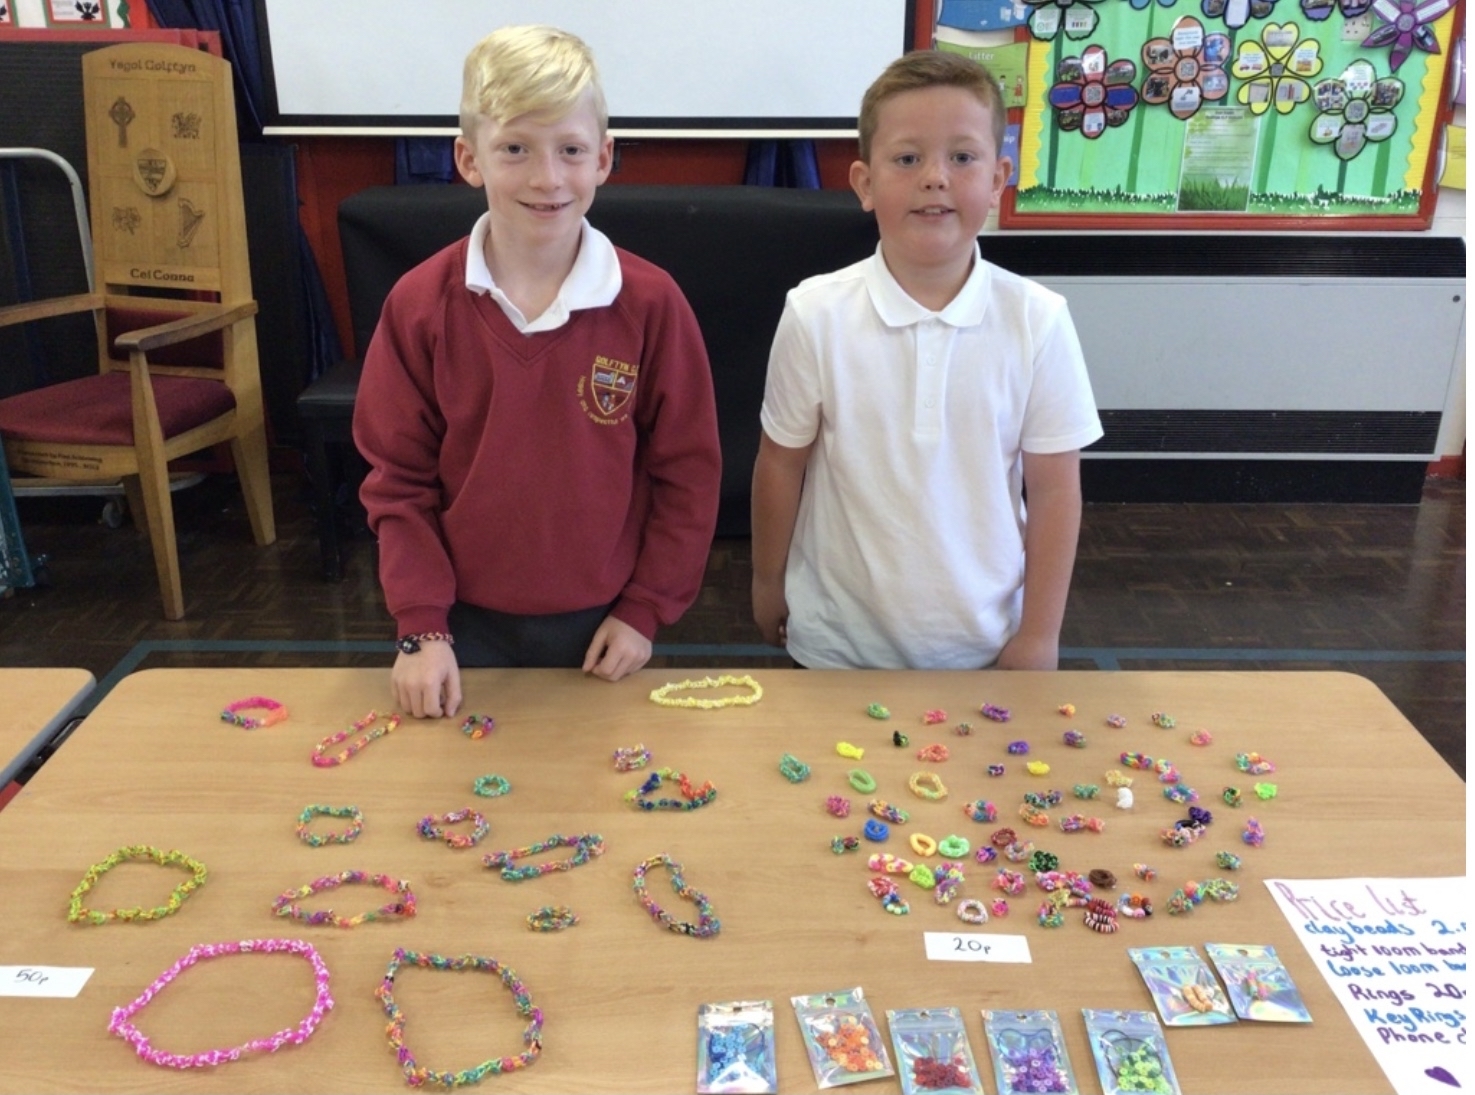 Luca and Harry with the fundraising bracelets.